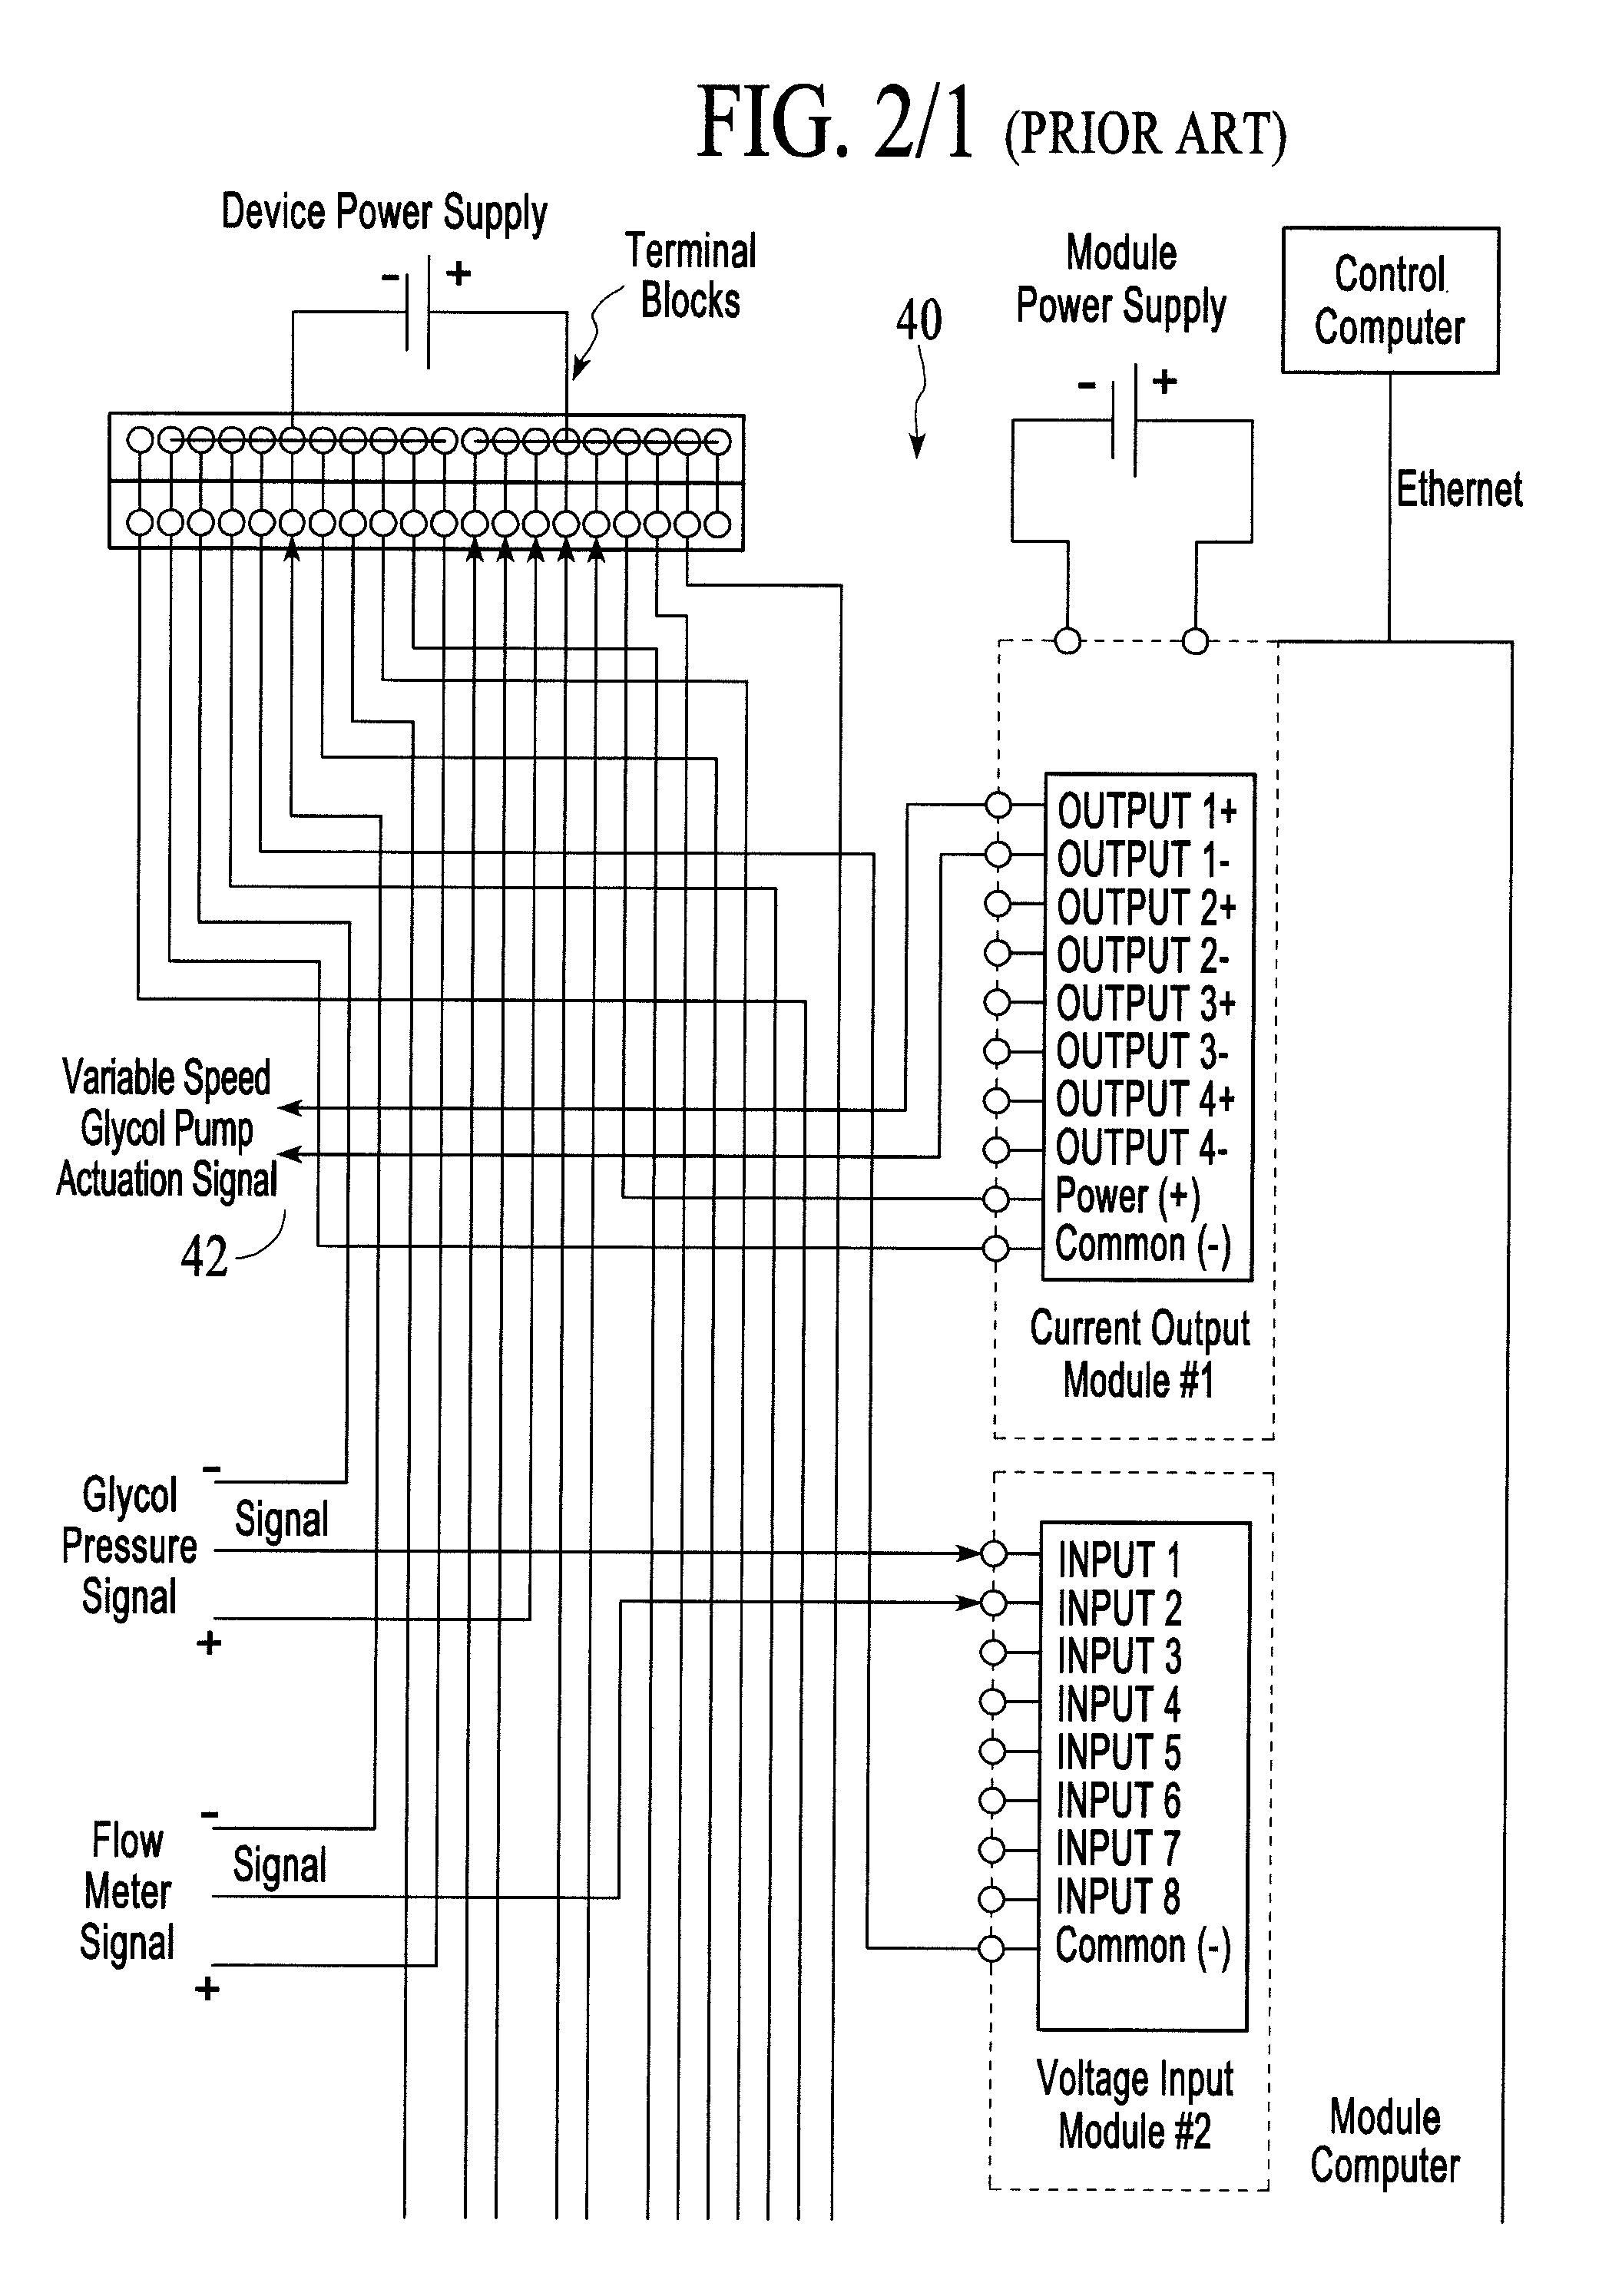 Control system simulator and simplified interconnection control system